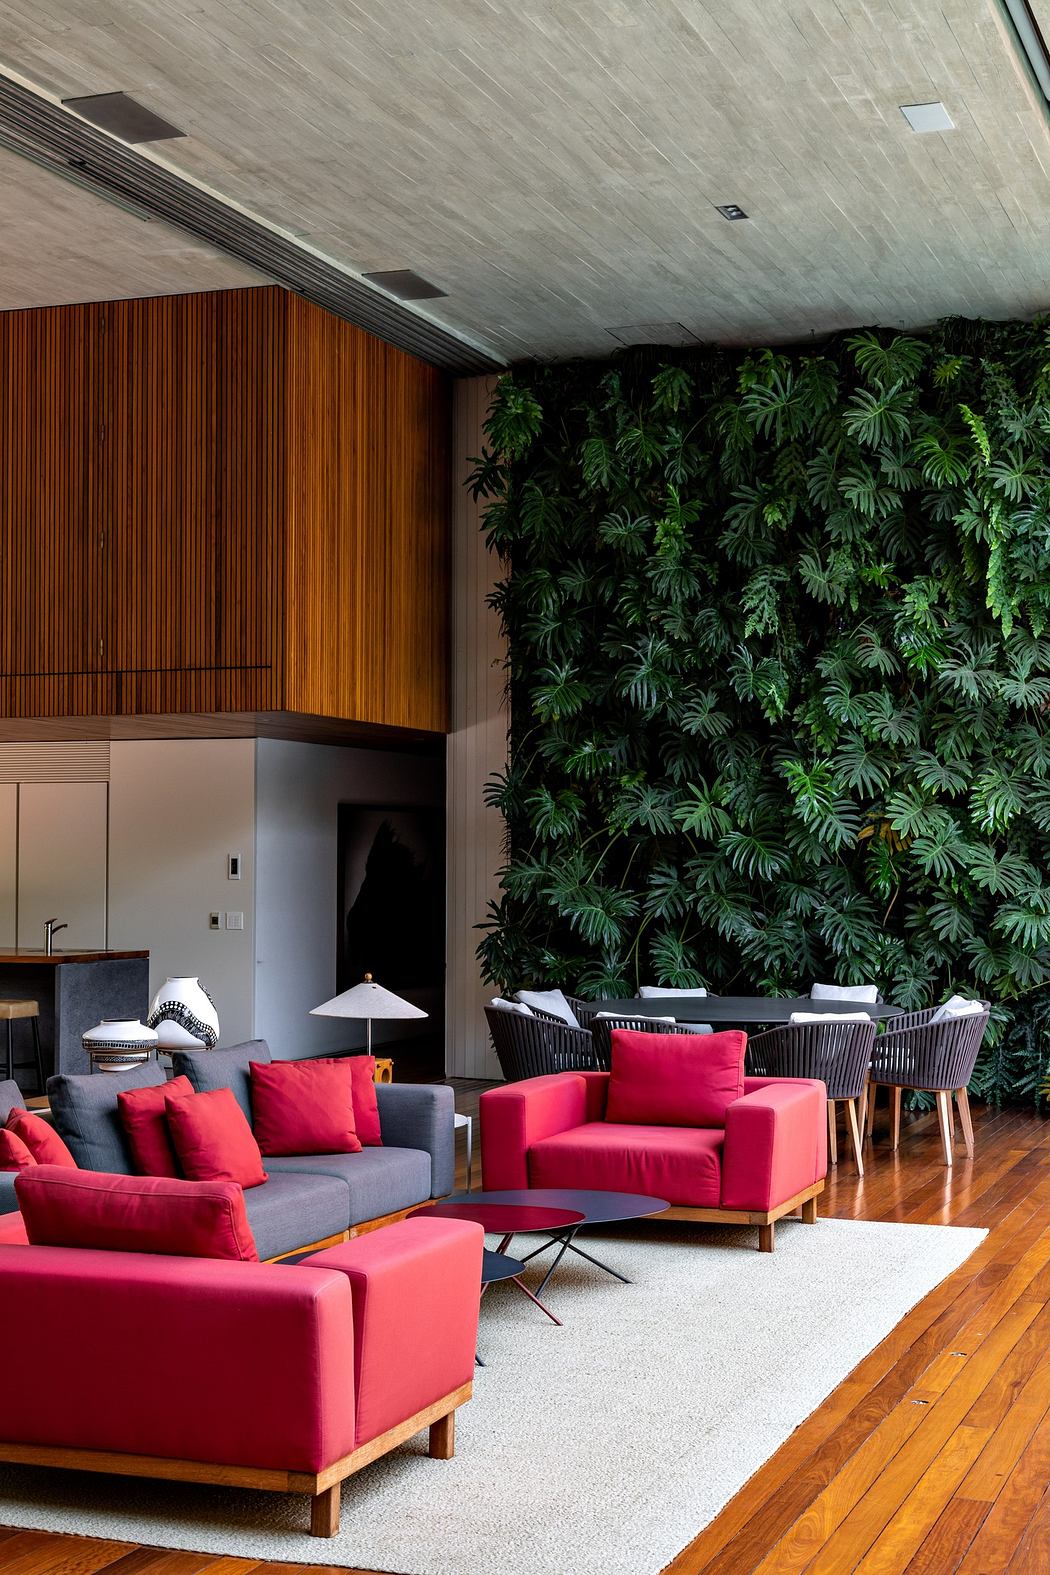 Contemporary living space with vibrant red sofas and a lush green living wall.